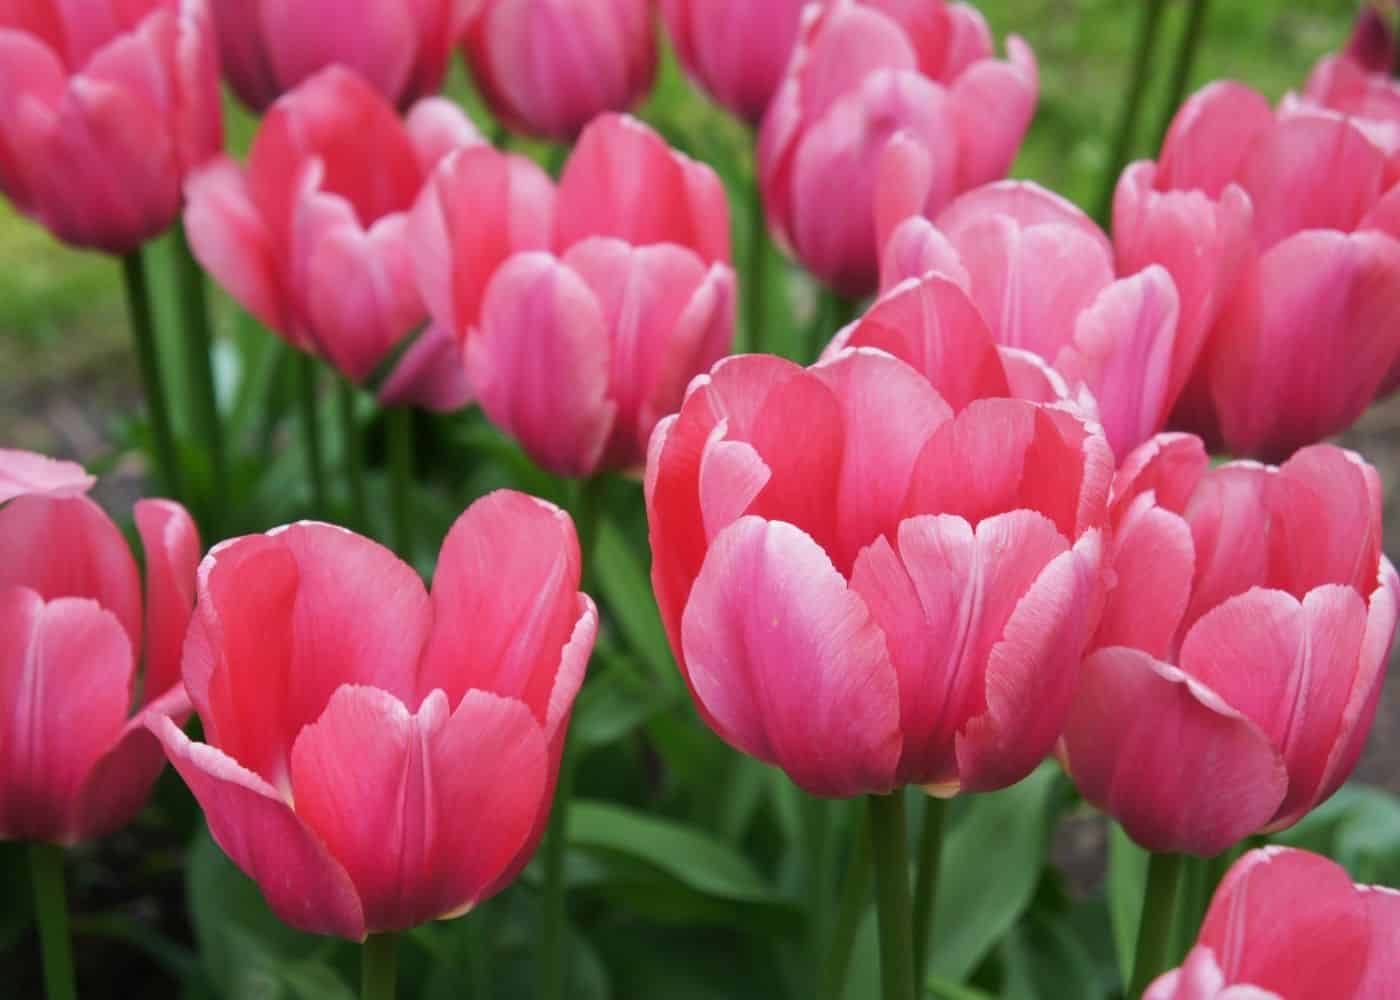 Types of tulips - pink impression